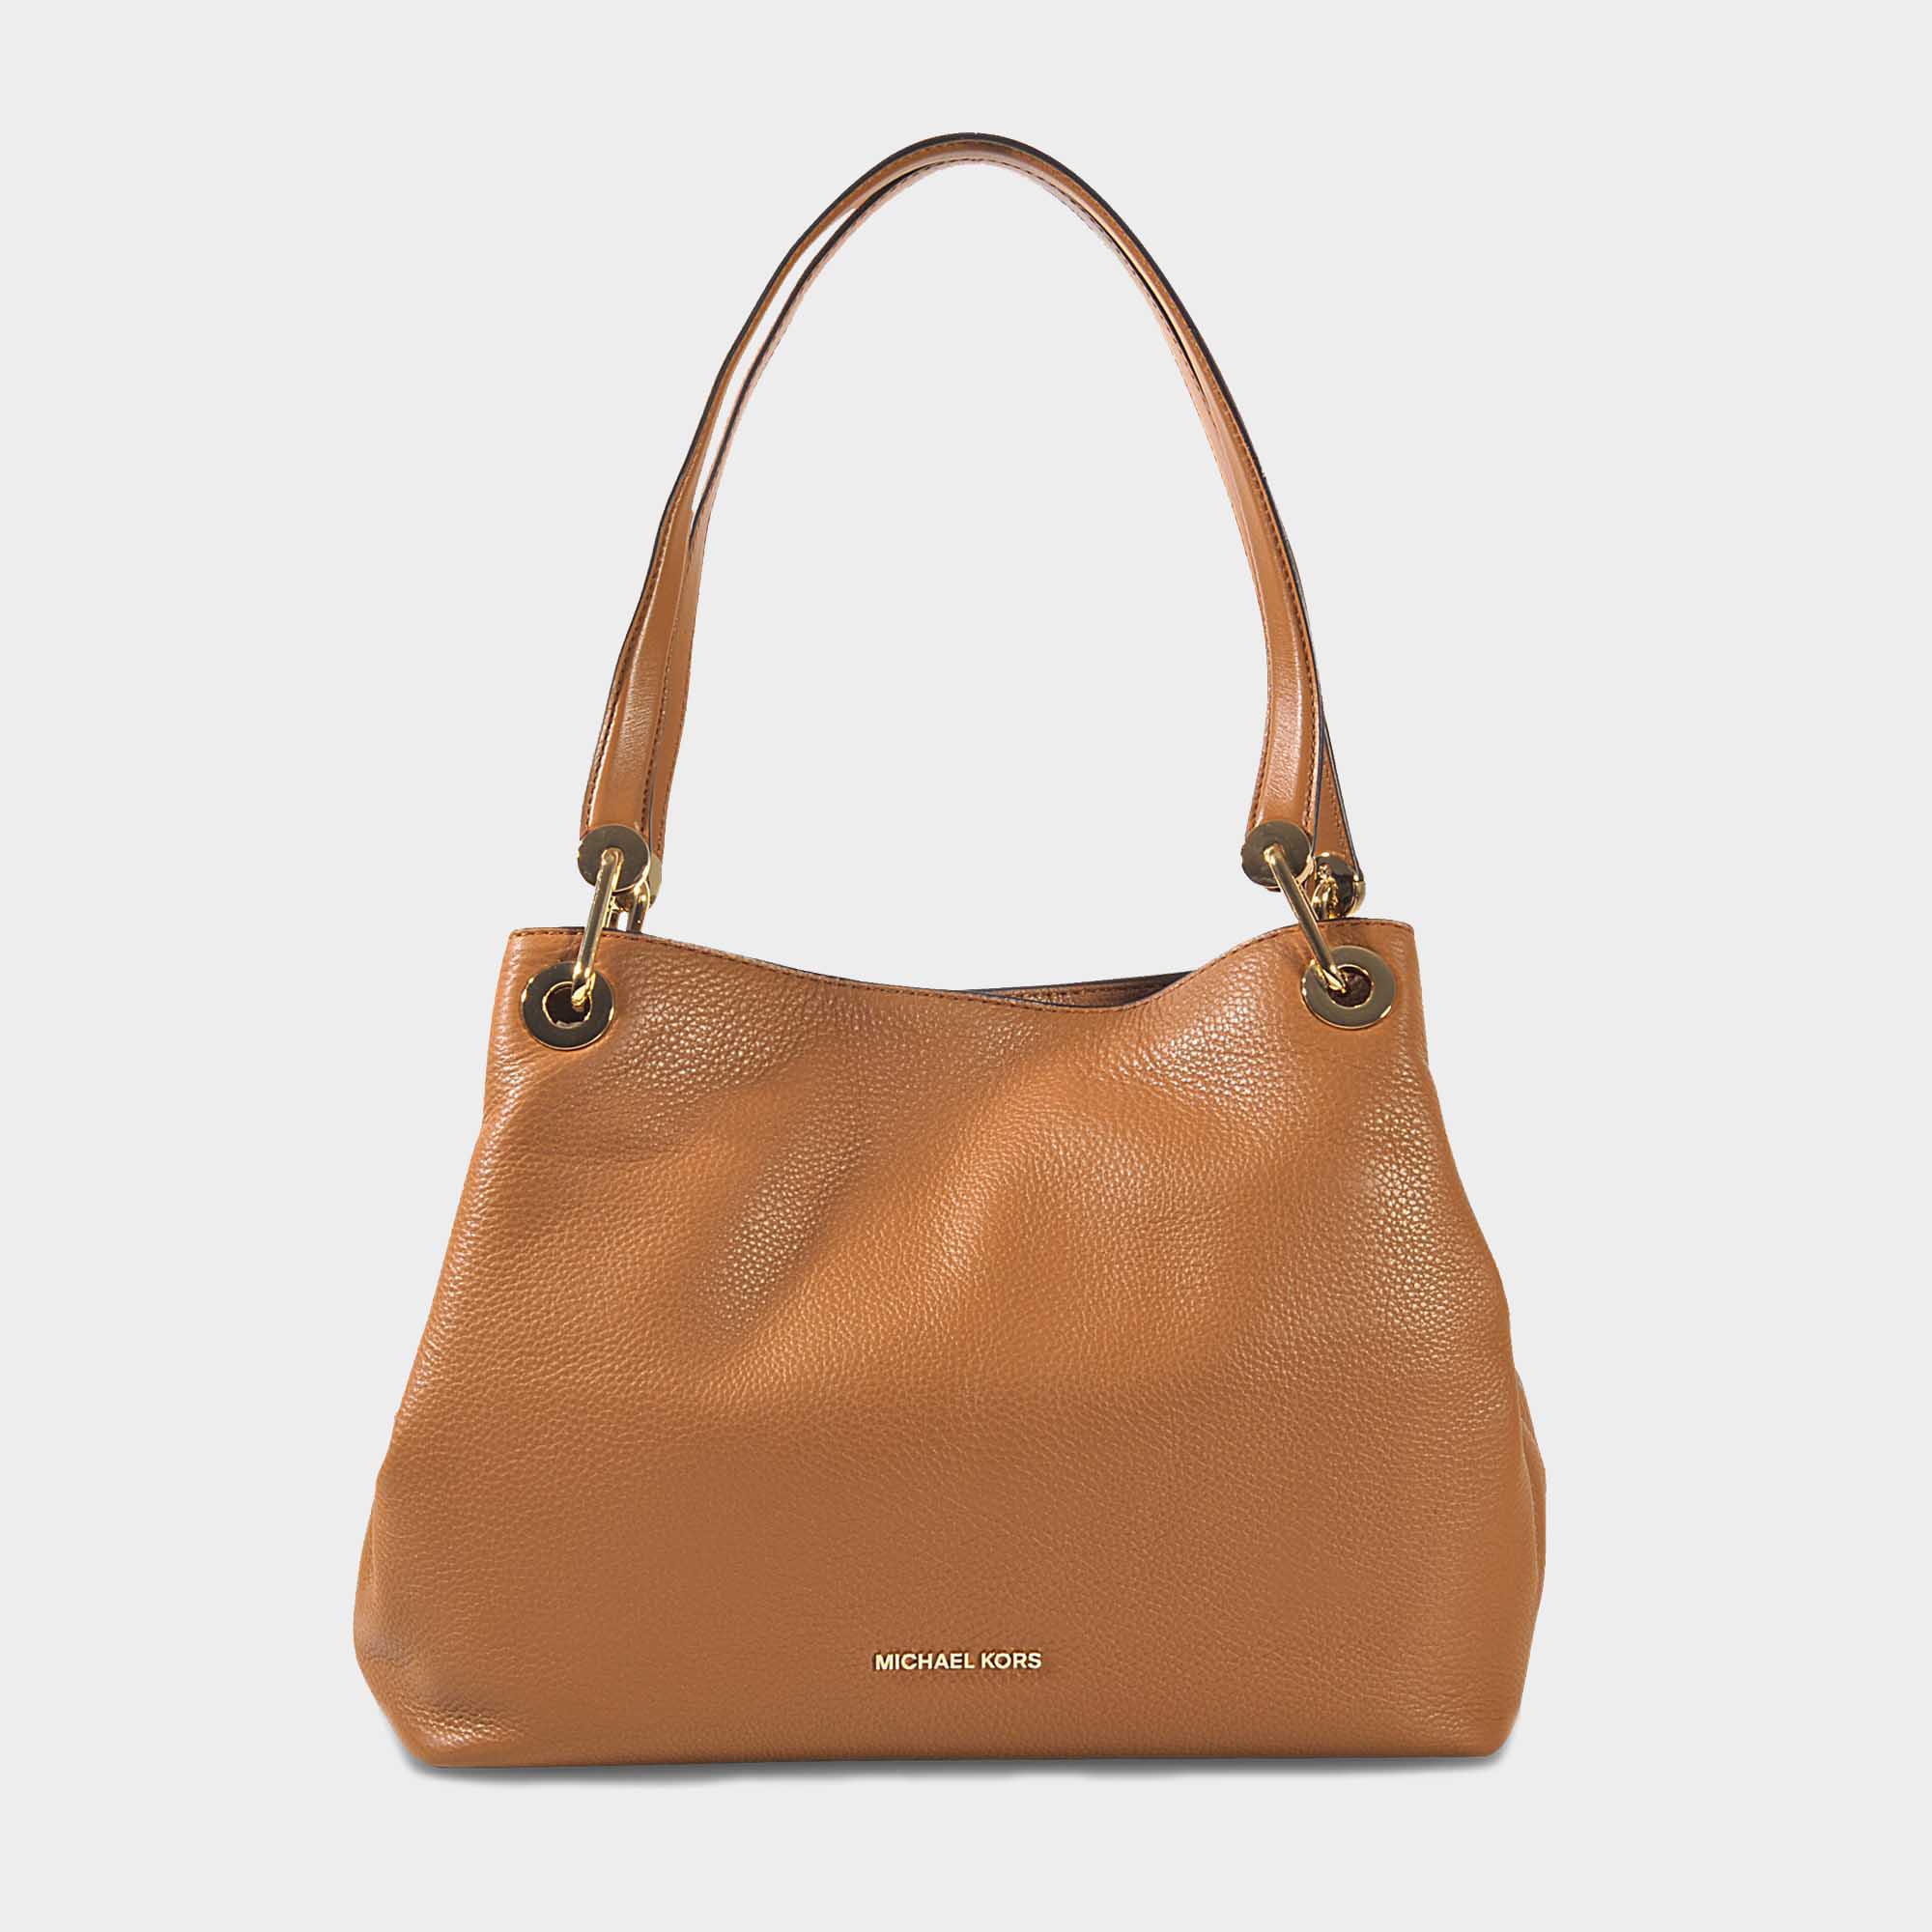 Lyst - Michael Michael Kors Raven Large Shoulder Tote Bag In Acorn Small Pebble Leather in Brown